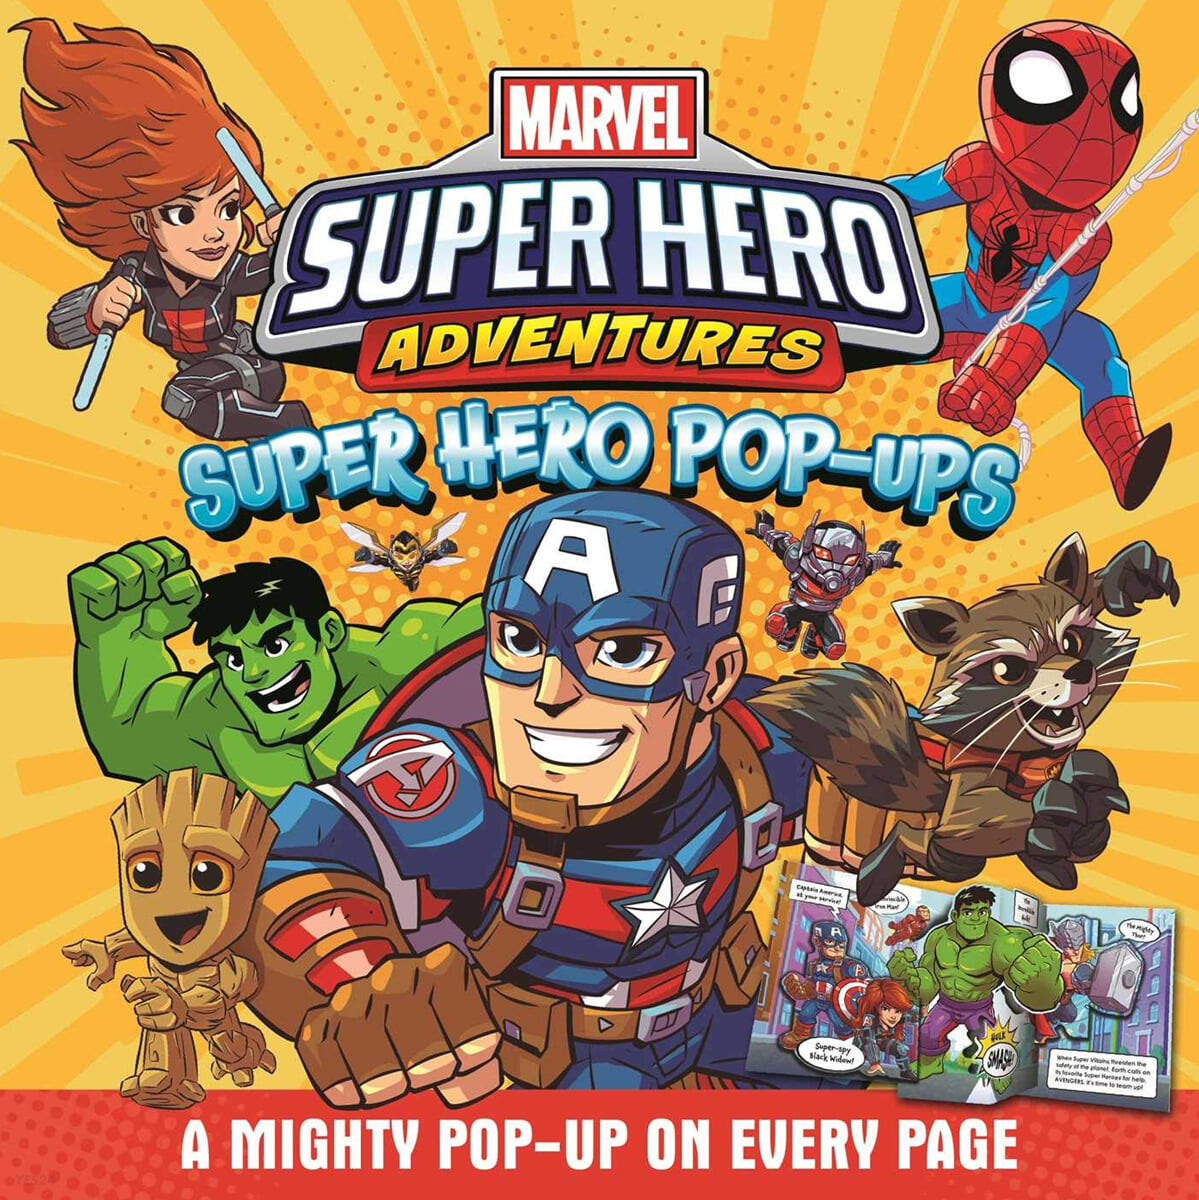 Super hero pop-ups: a mighty pop-up on every page